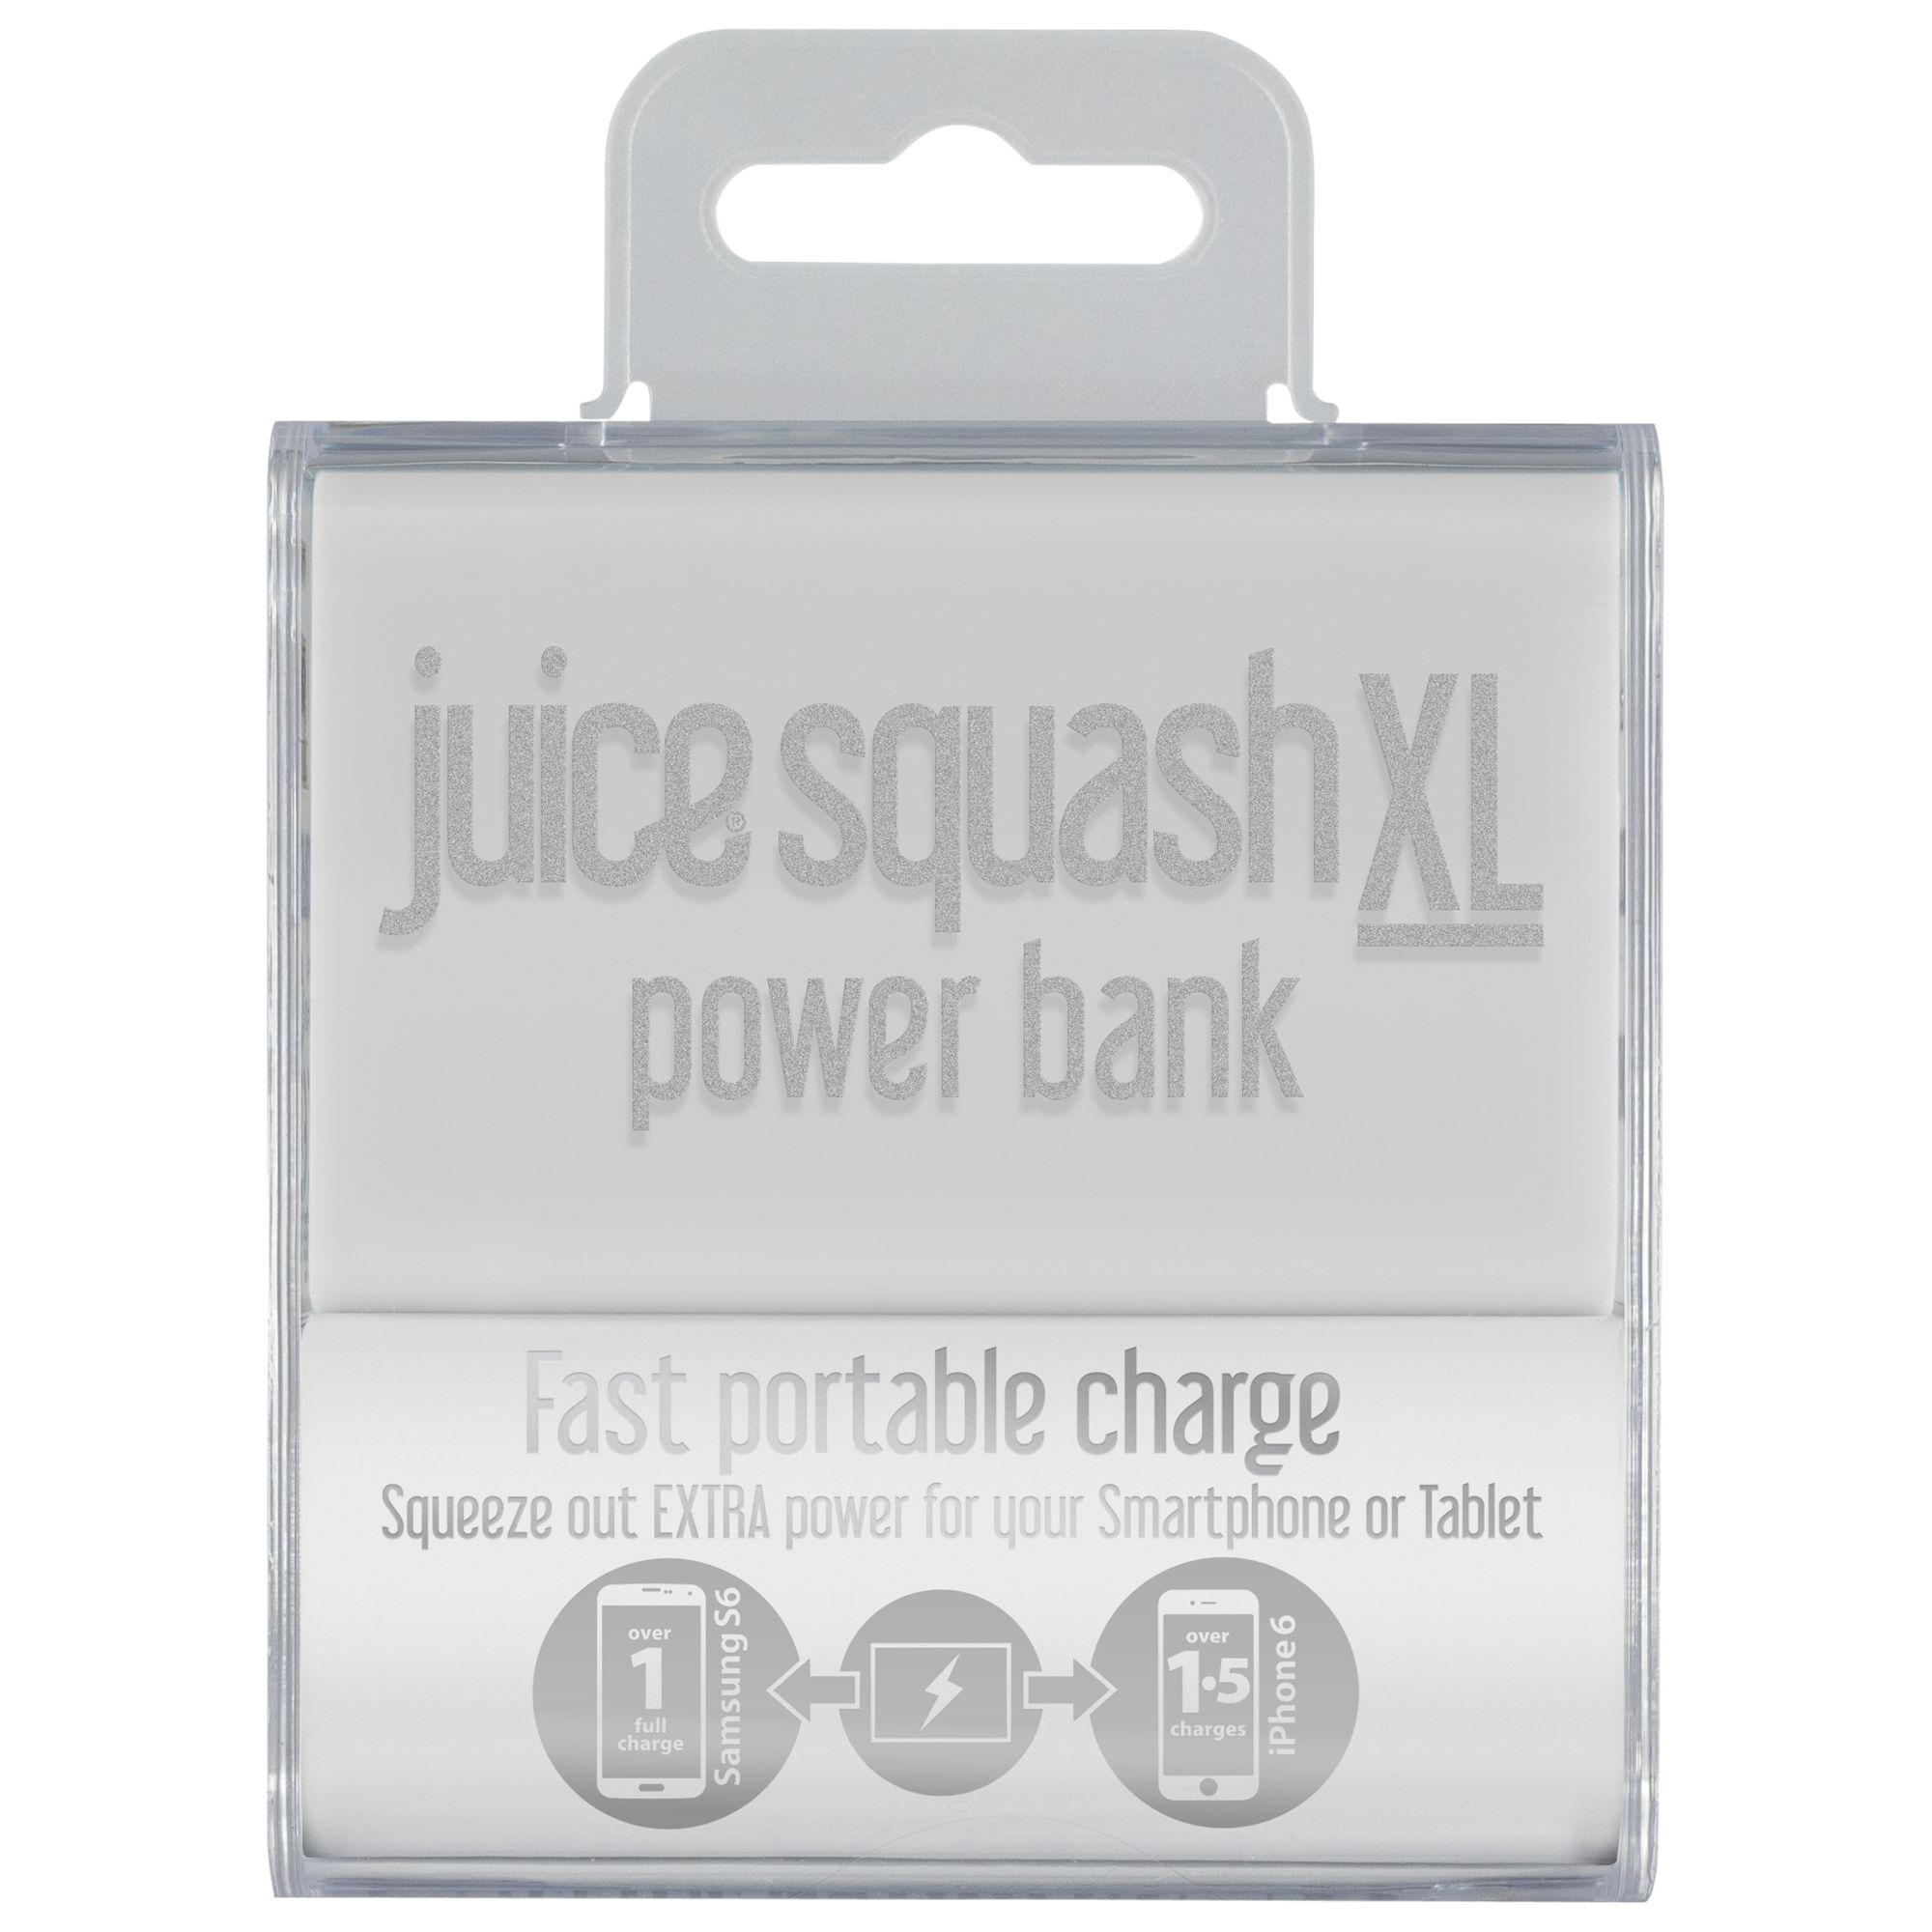 Juice Squash XL Power Bank Portable Charger for iPhone 6/Samsung 5G